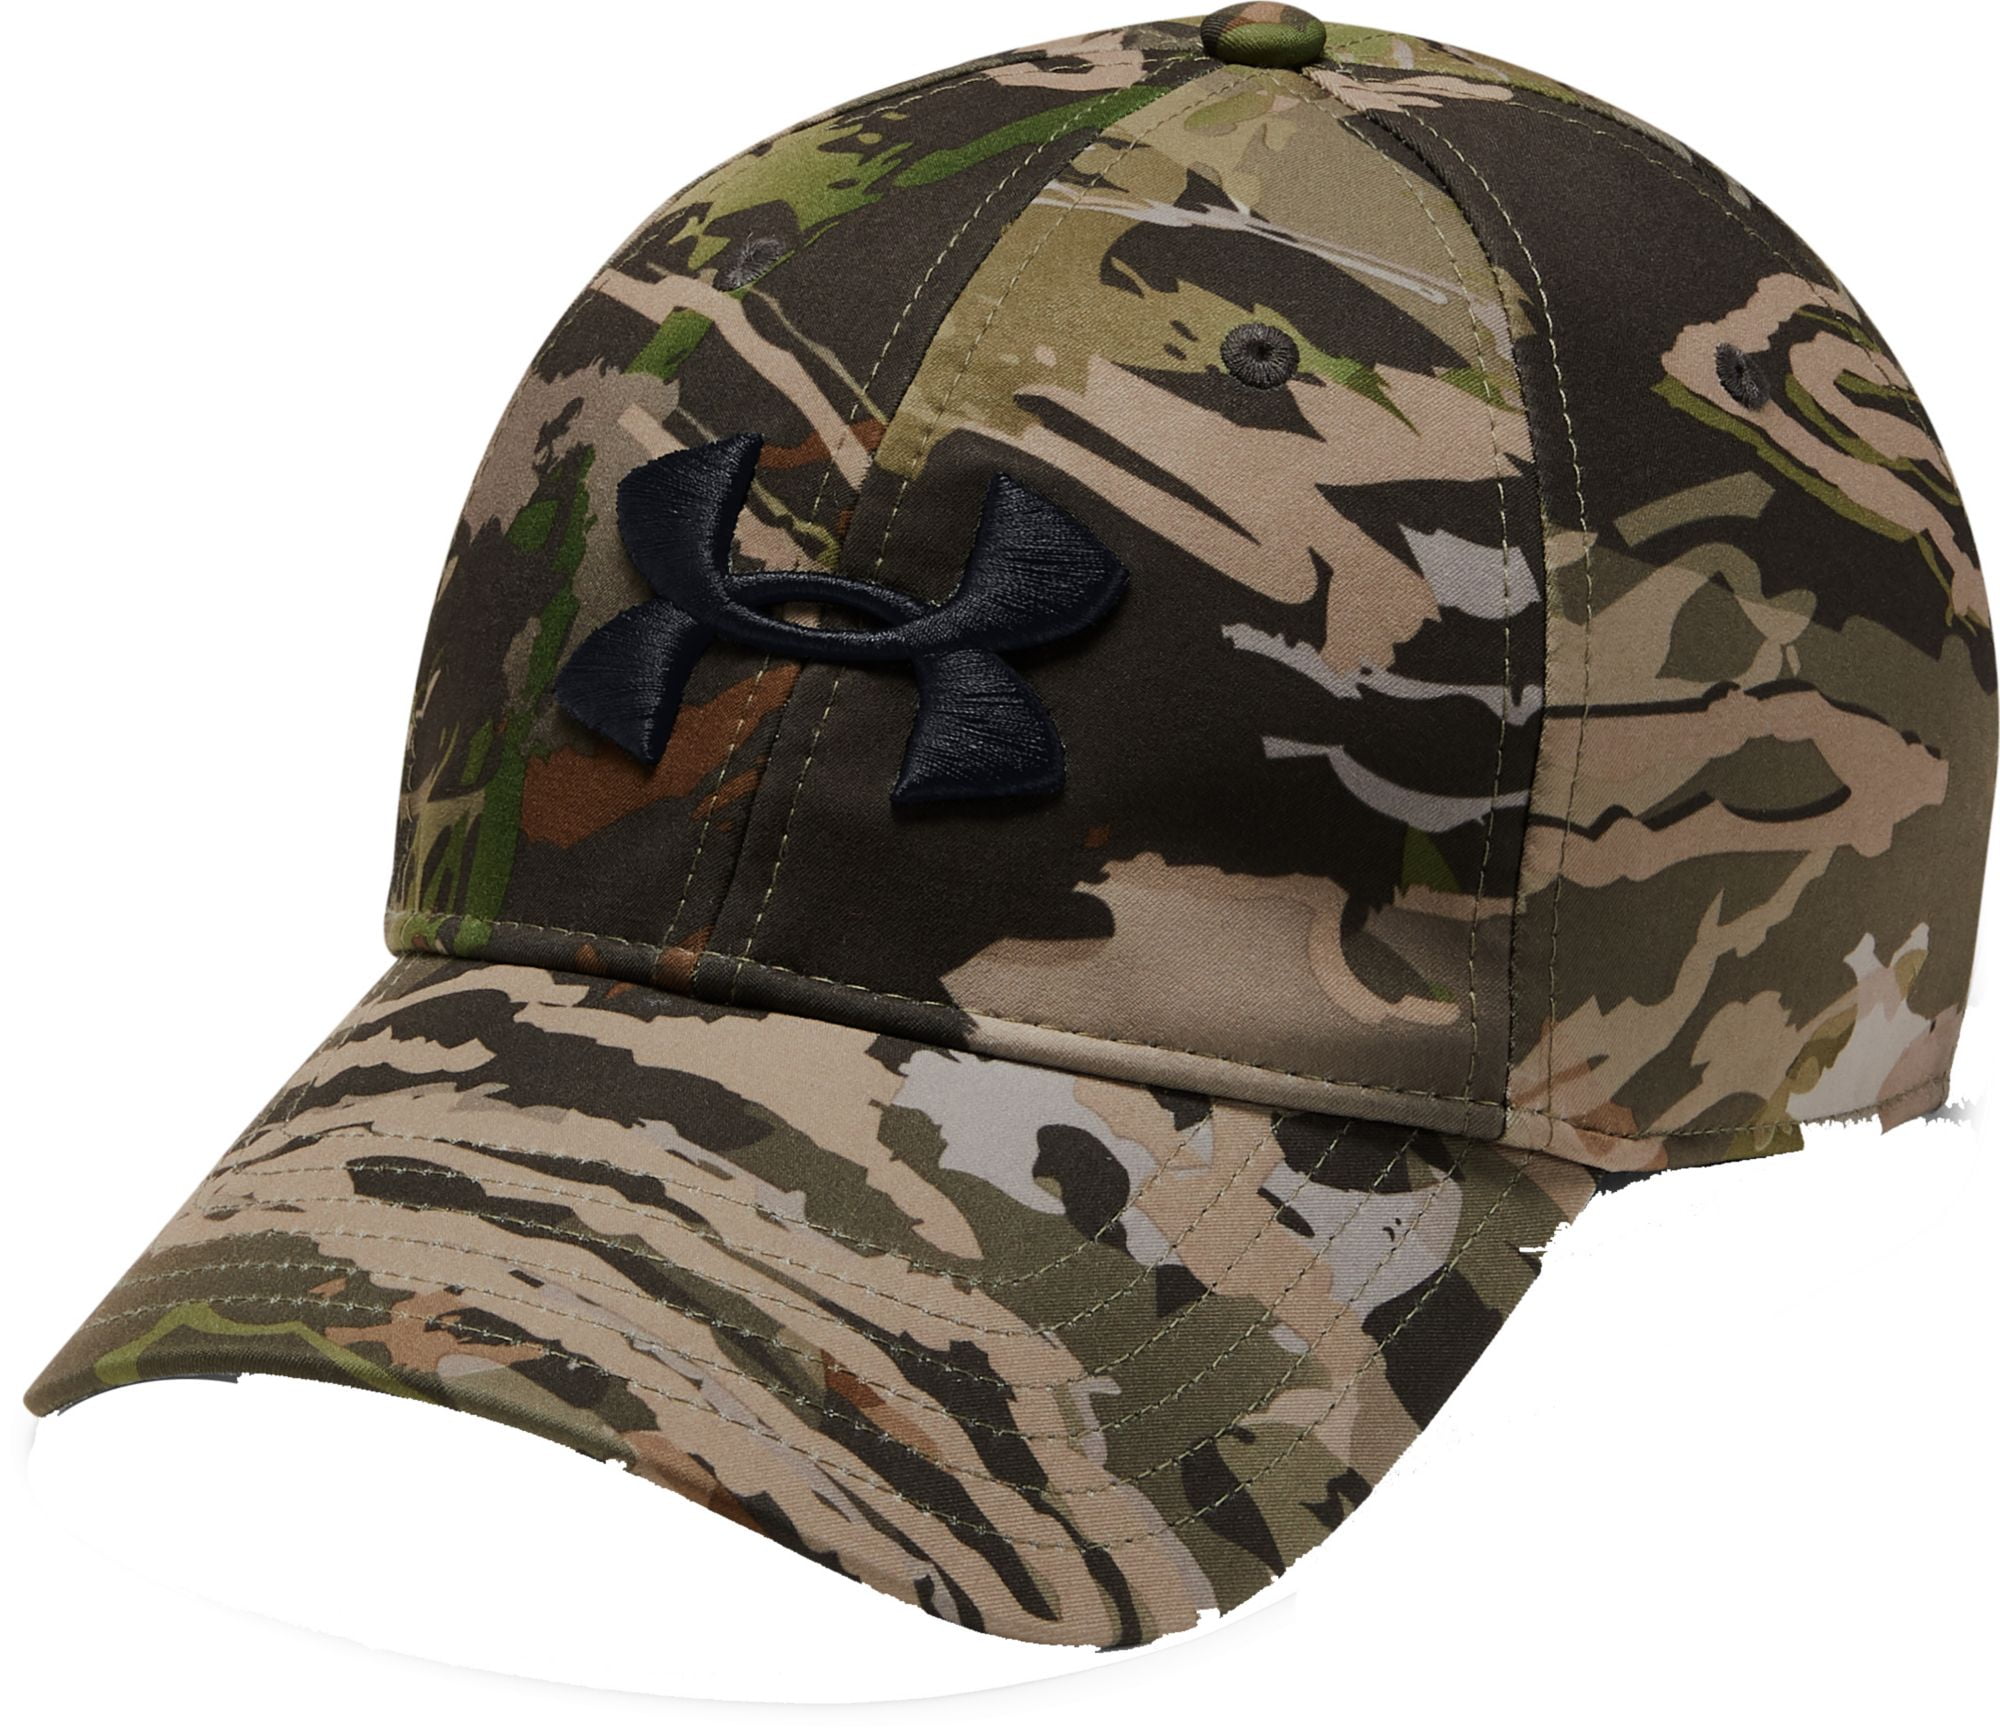 under armour camo hat stretch fit